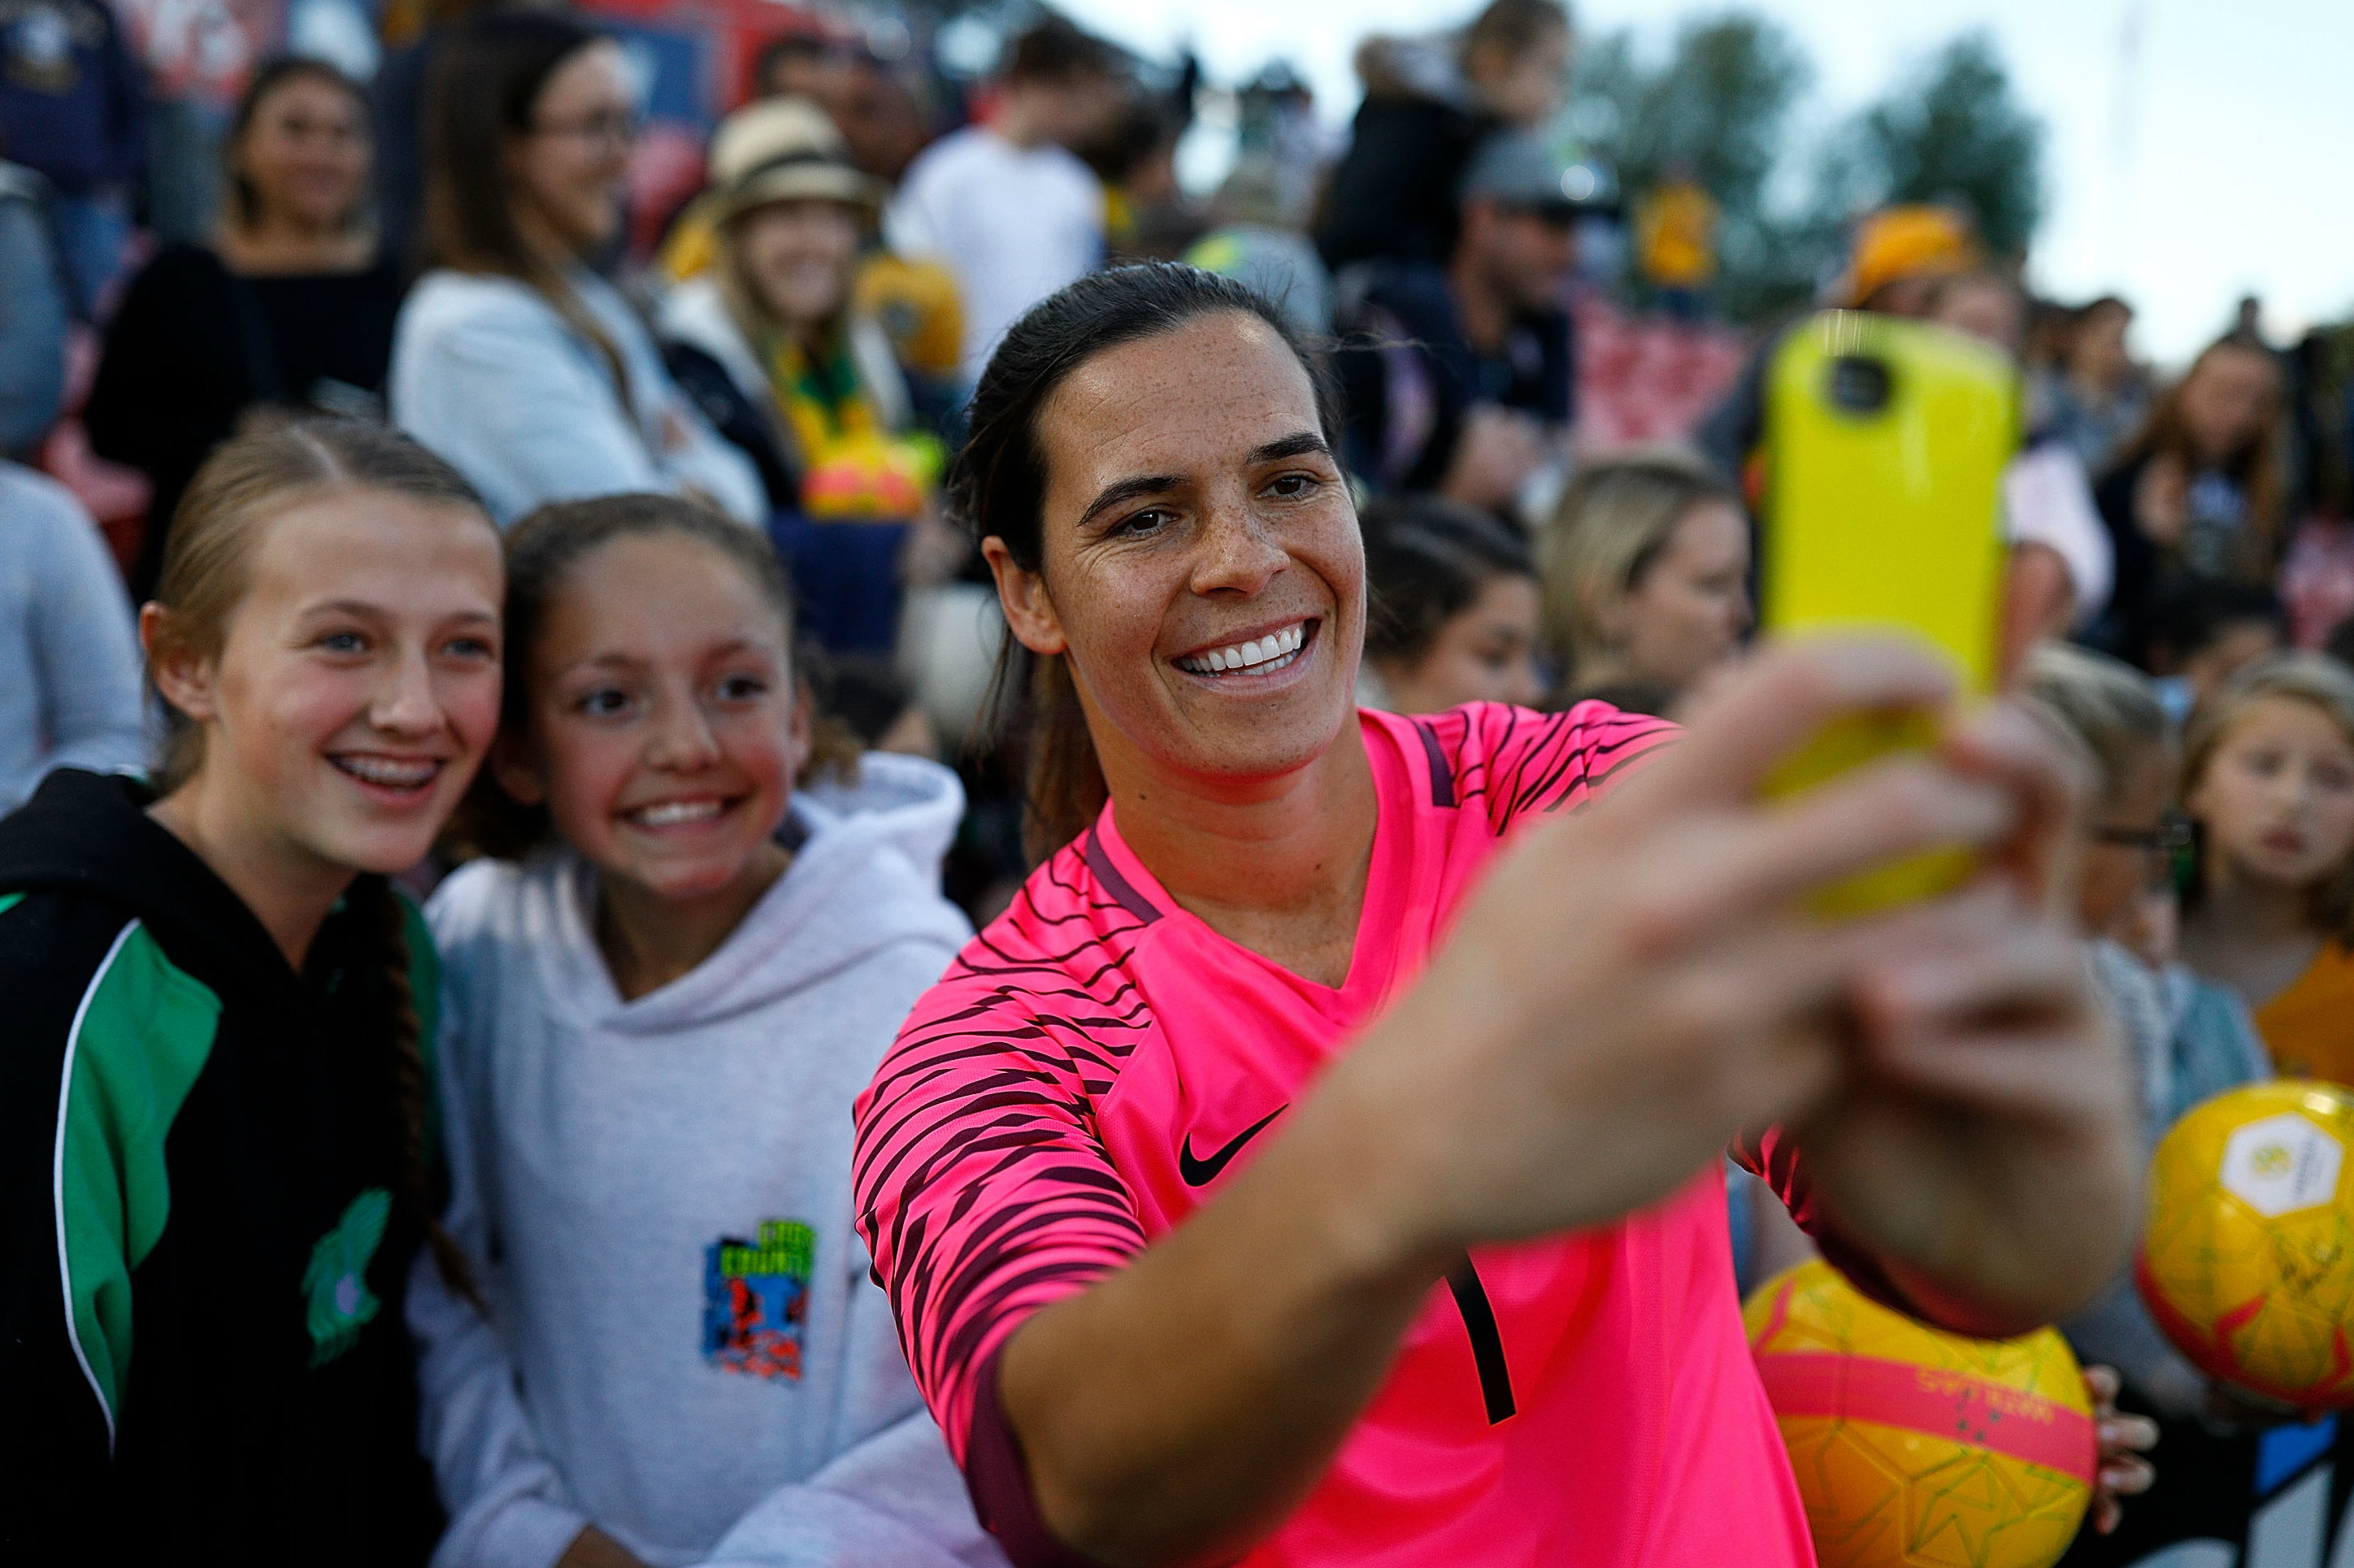 Westfield Matildas goalkeeper Lydia Williams takes a selfie with some fans.